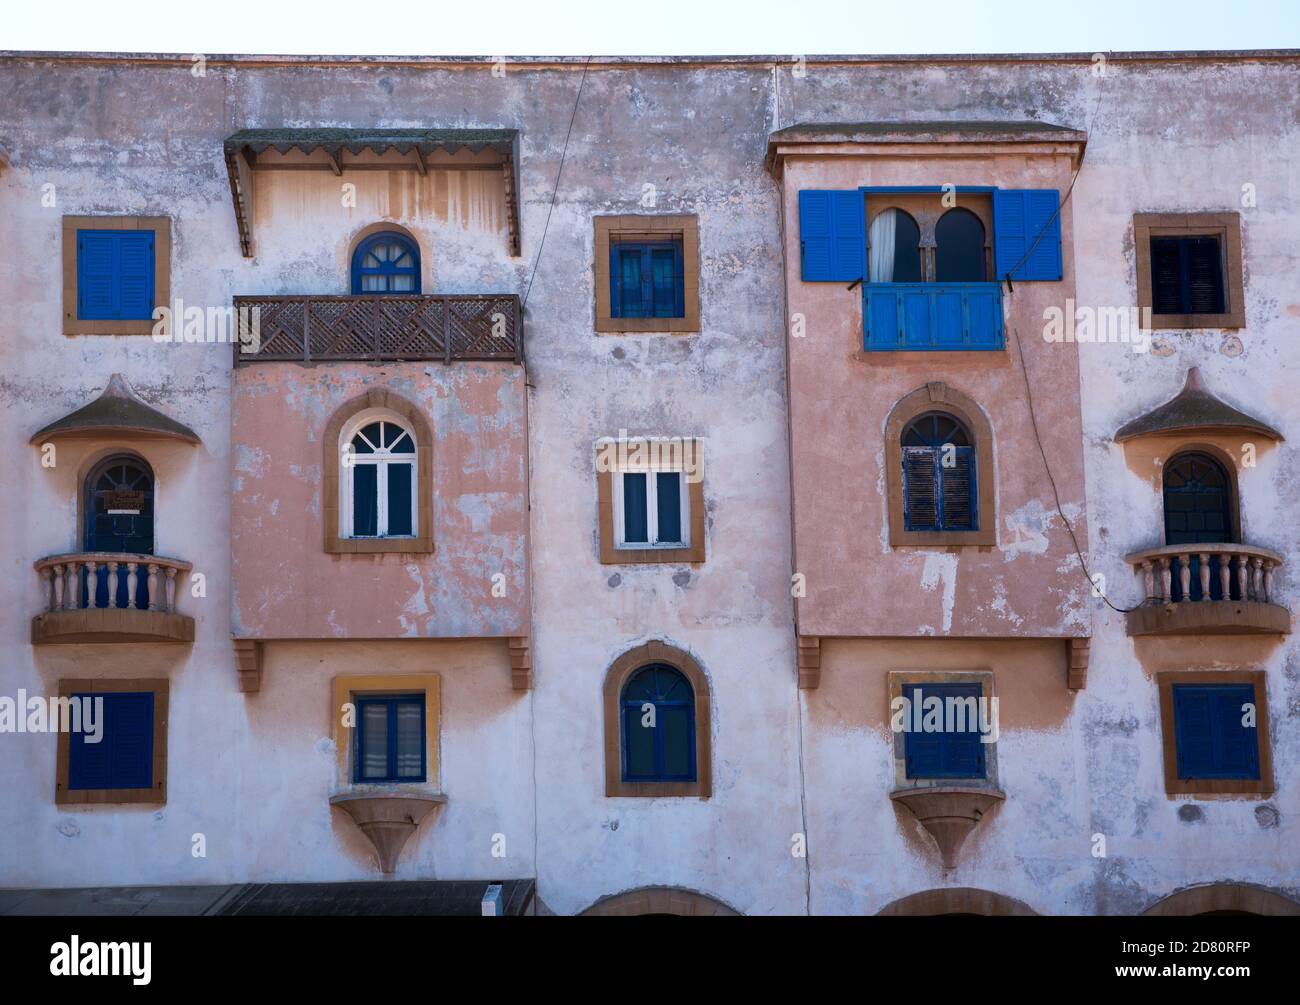 Morocco, Fez, facade of a building with multiple windows of different sizes and balconies Stock Photo